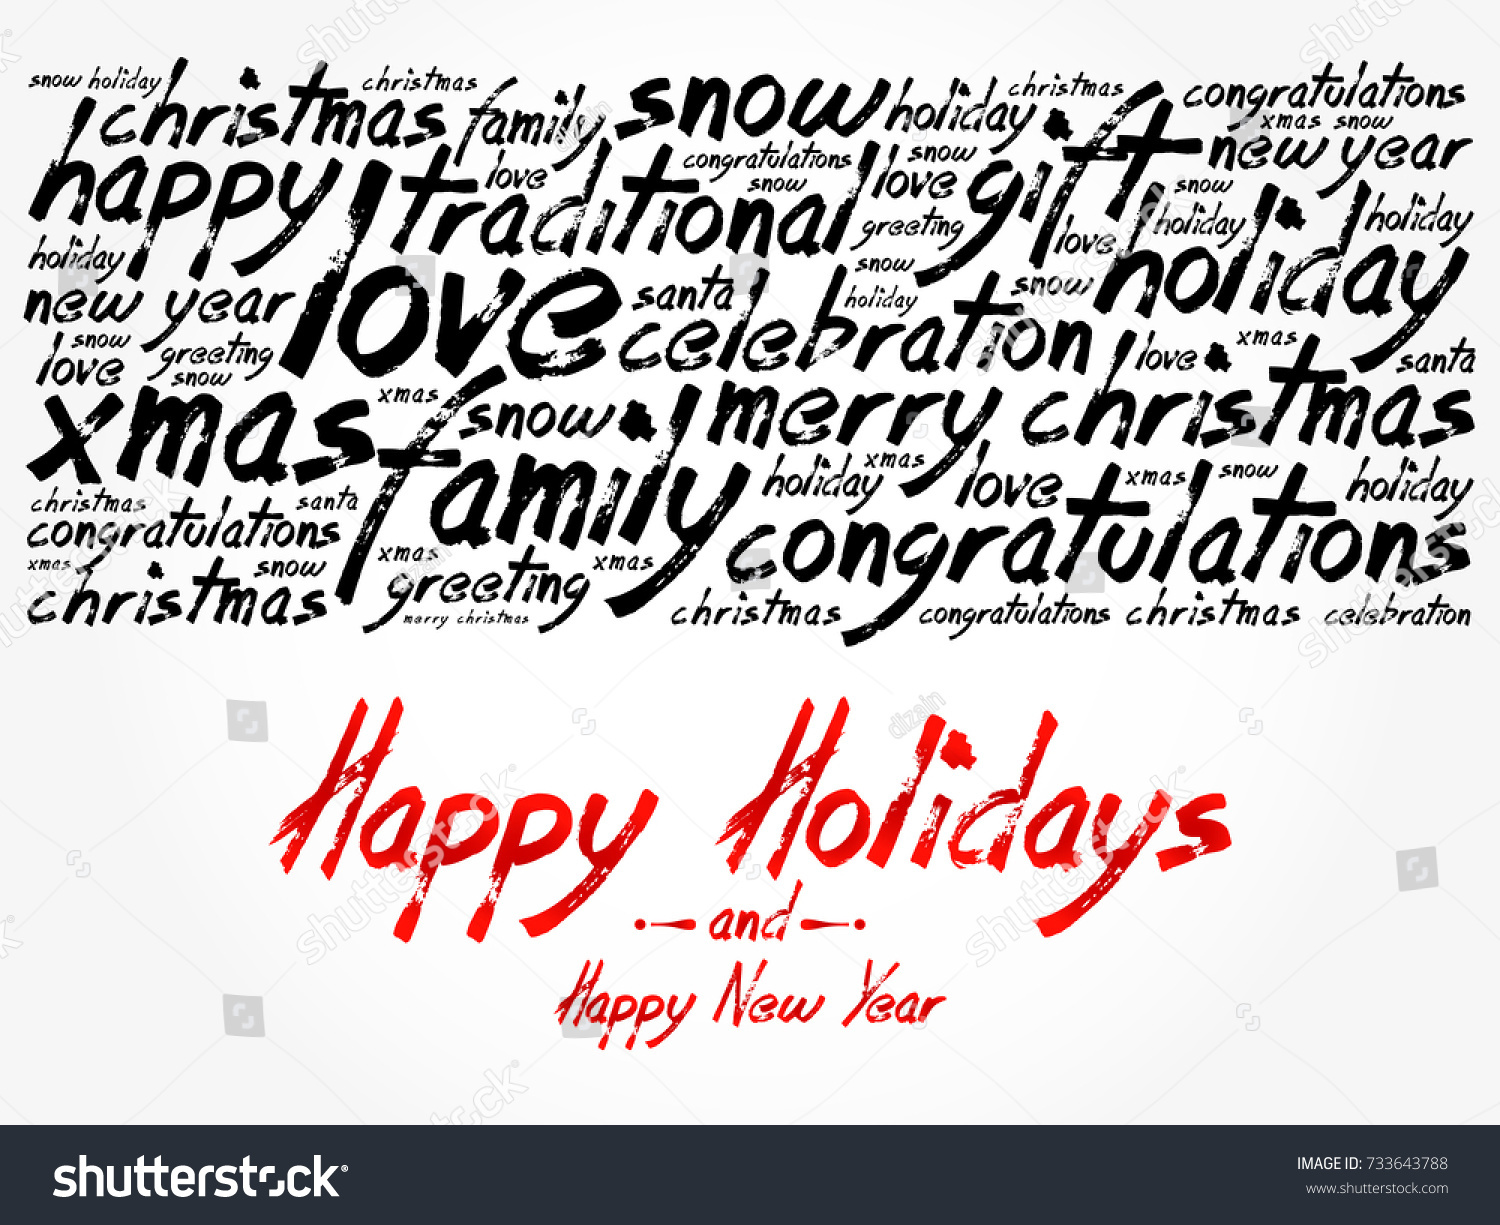 Happy Holidays and Happy New Year Christmas background word cloud holidays lettering collage